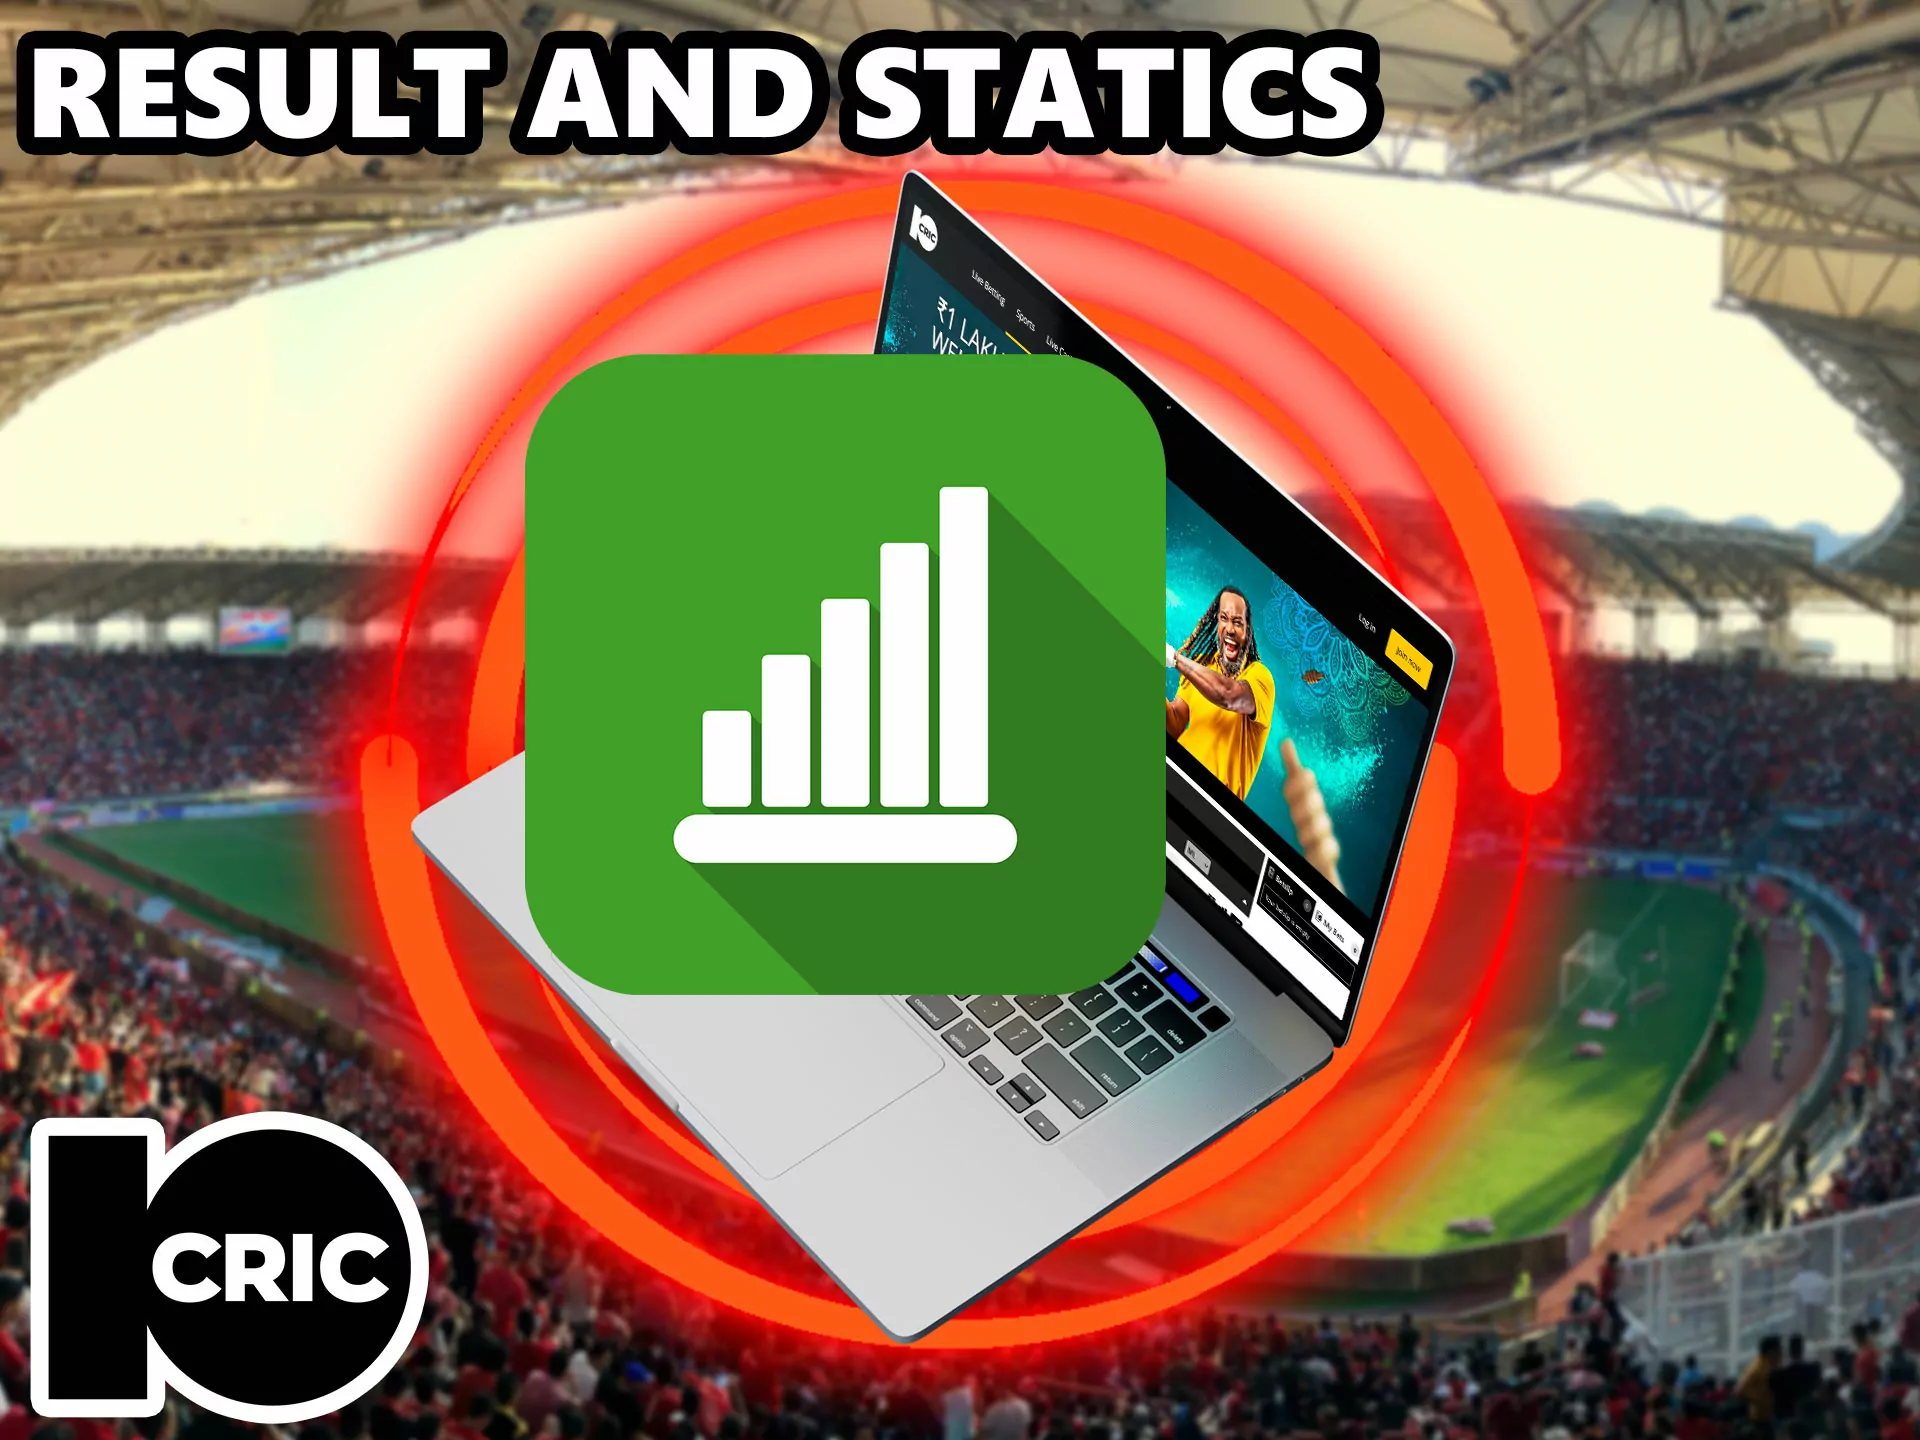 This section is needed for analytics, so that the player can analyze the matches before placing a bet.